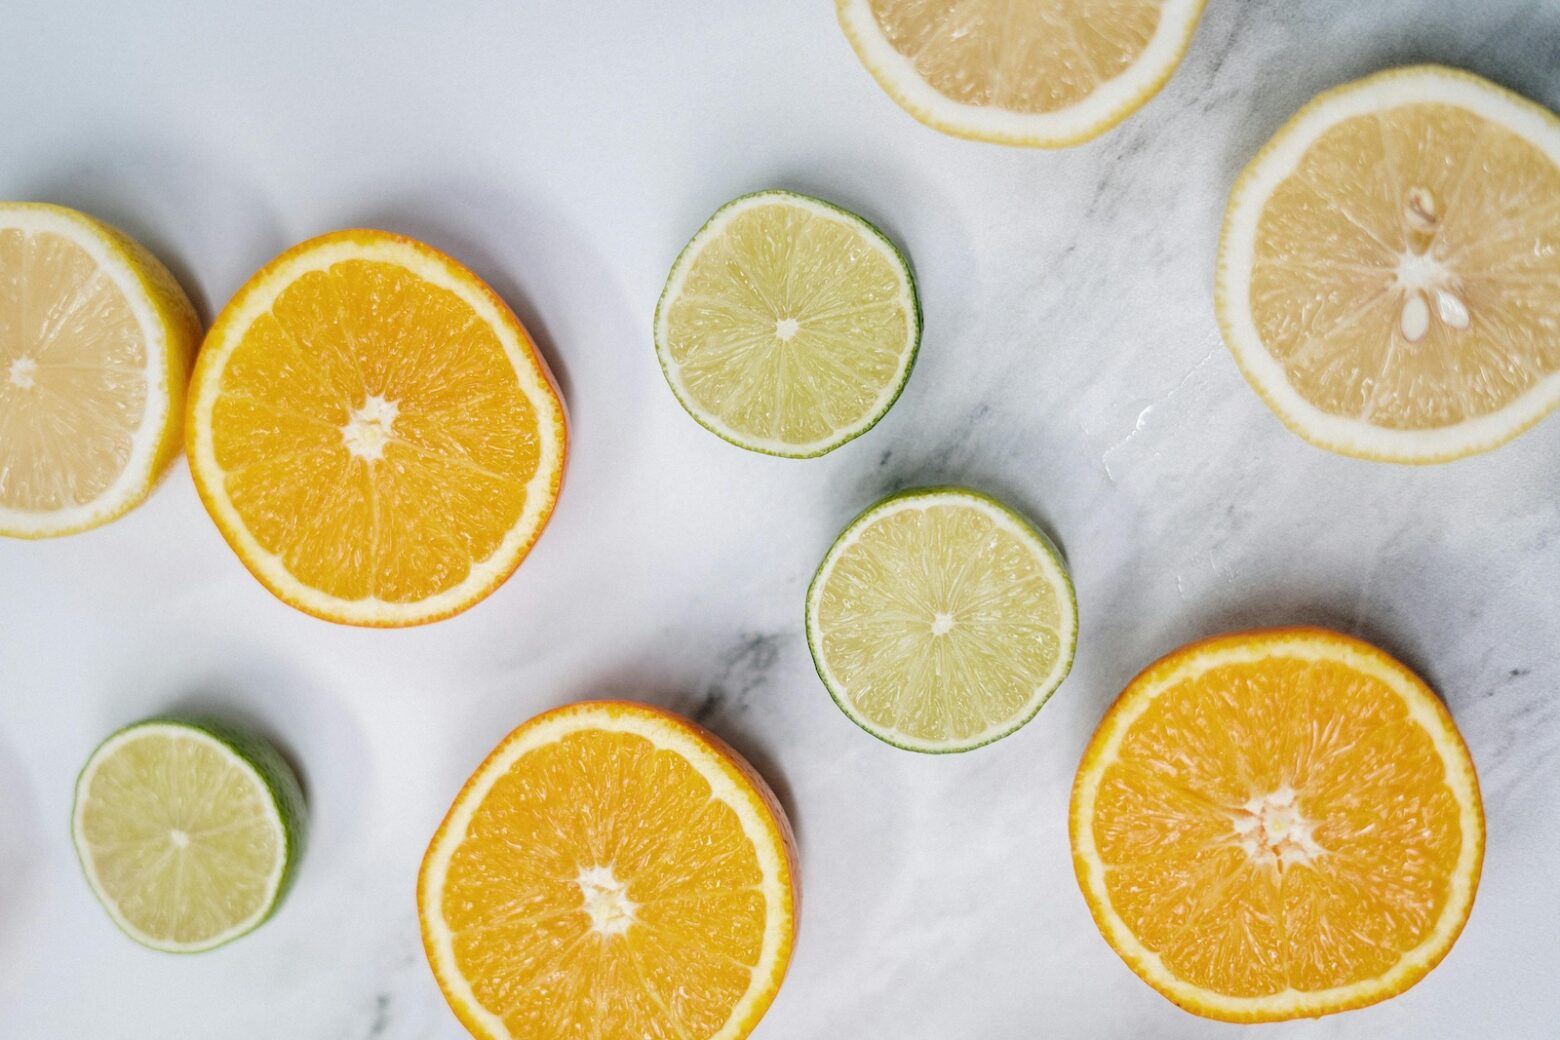 Limes, lemons, and oranges on the countertop